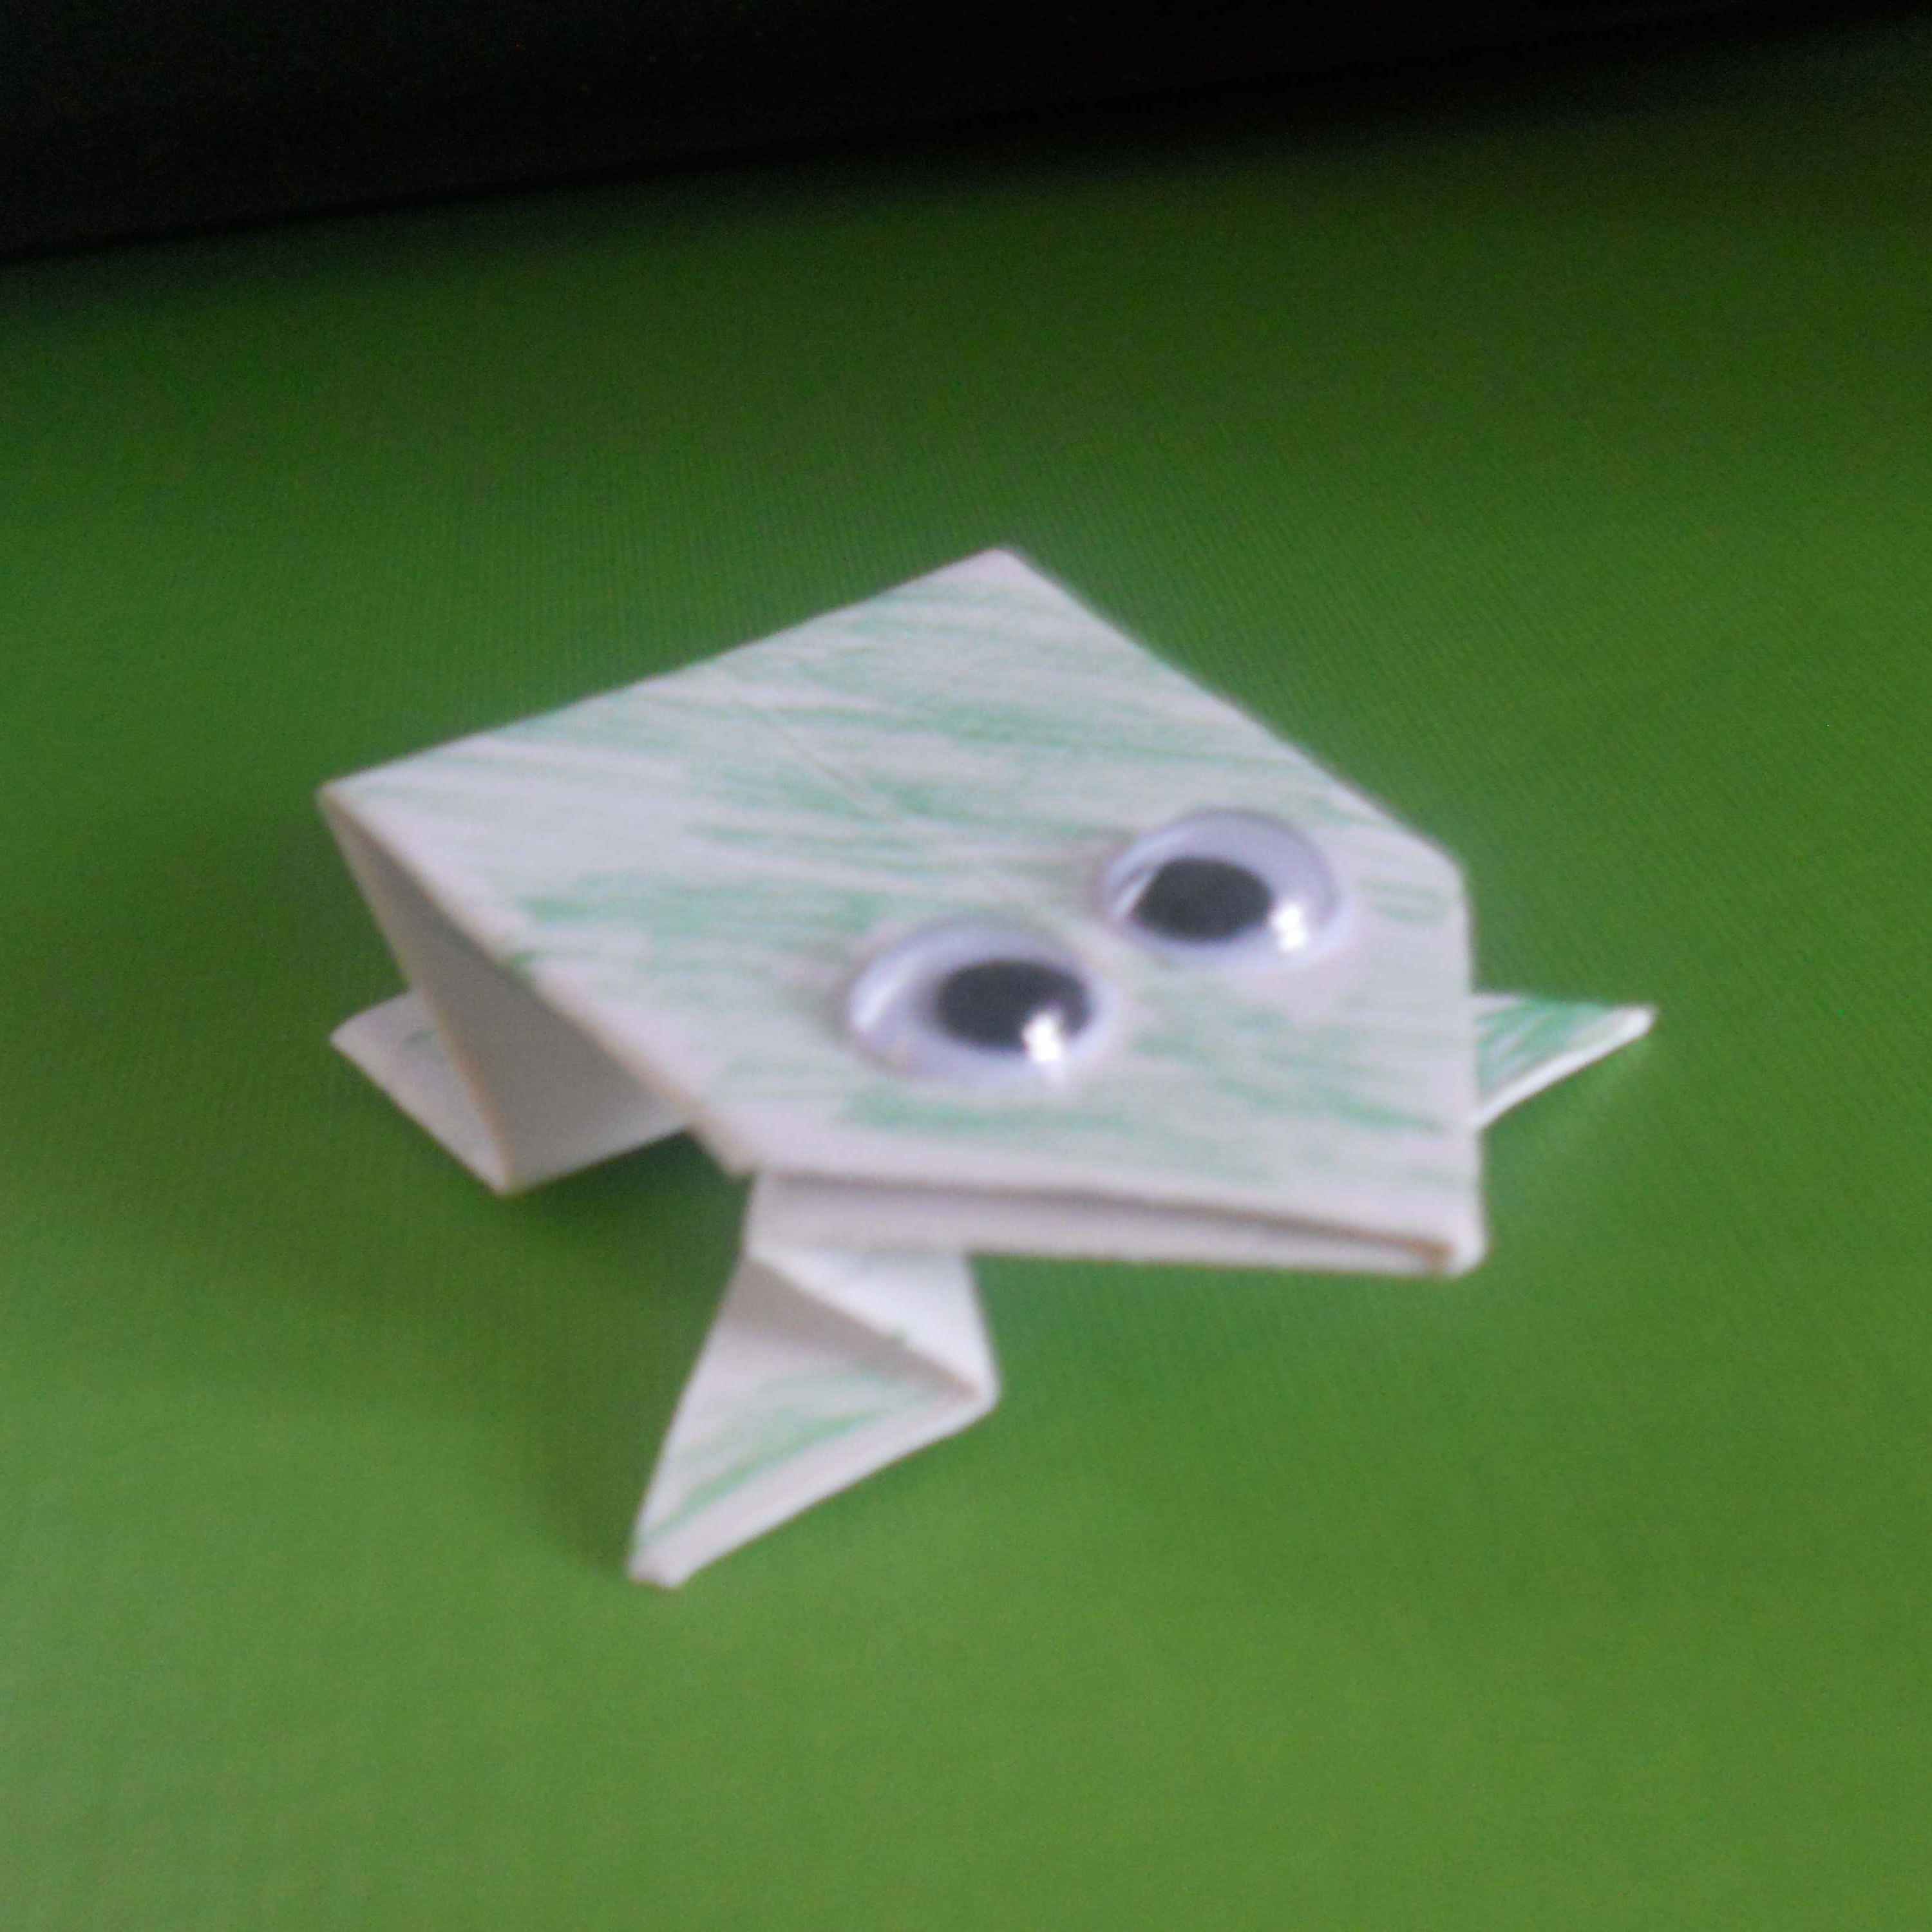 Index Card Origami How To Fold An Origami Jumping Frog